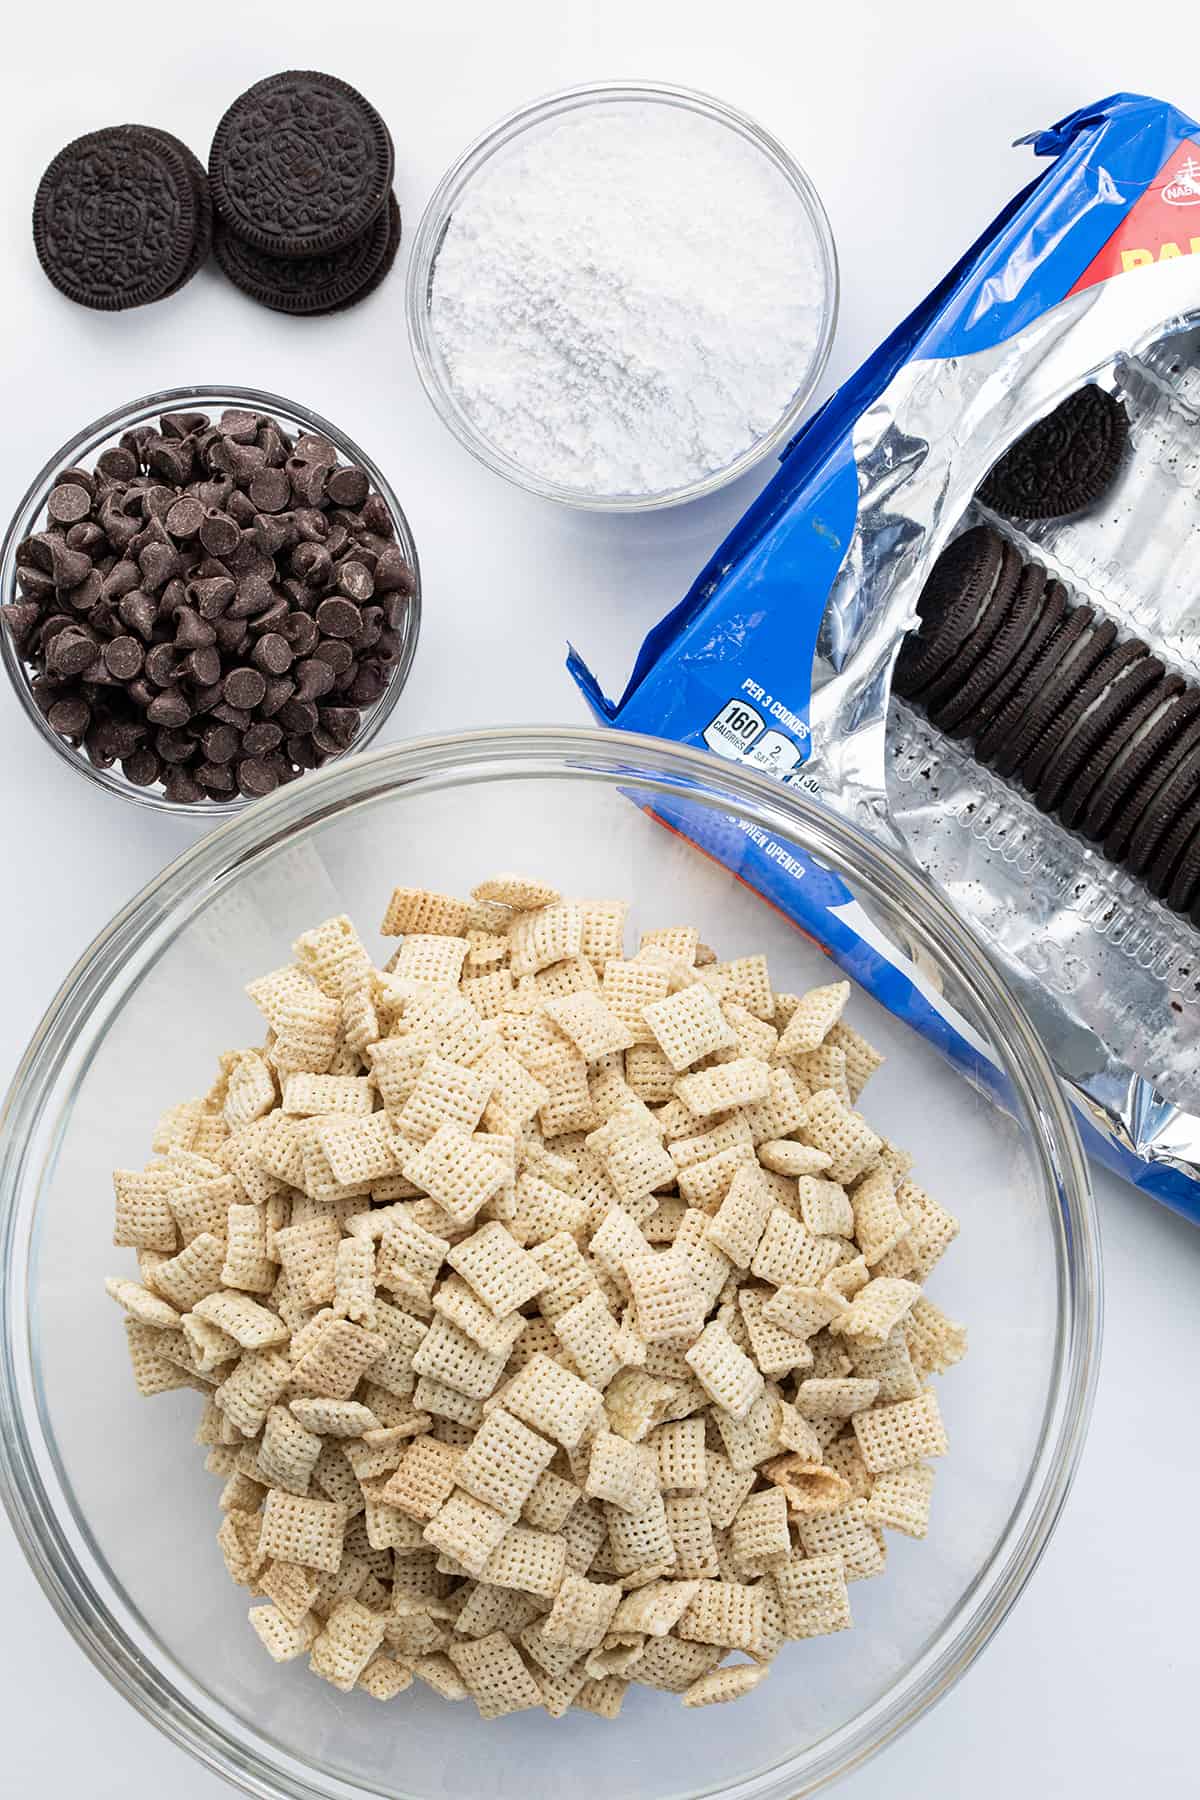 Ingredients Used to Make Cookies and Cream Puppy Chow with Cereal, Oreos, Chocolate, and Confectioners Sugar